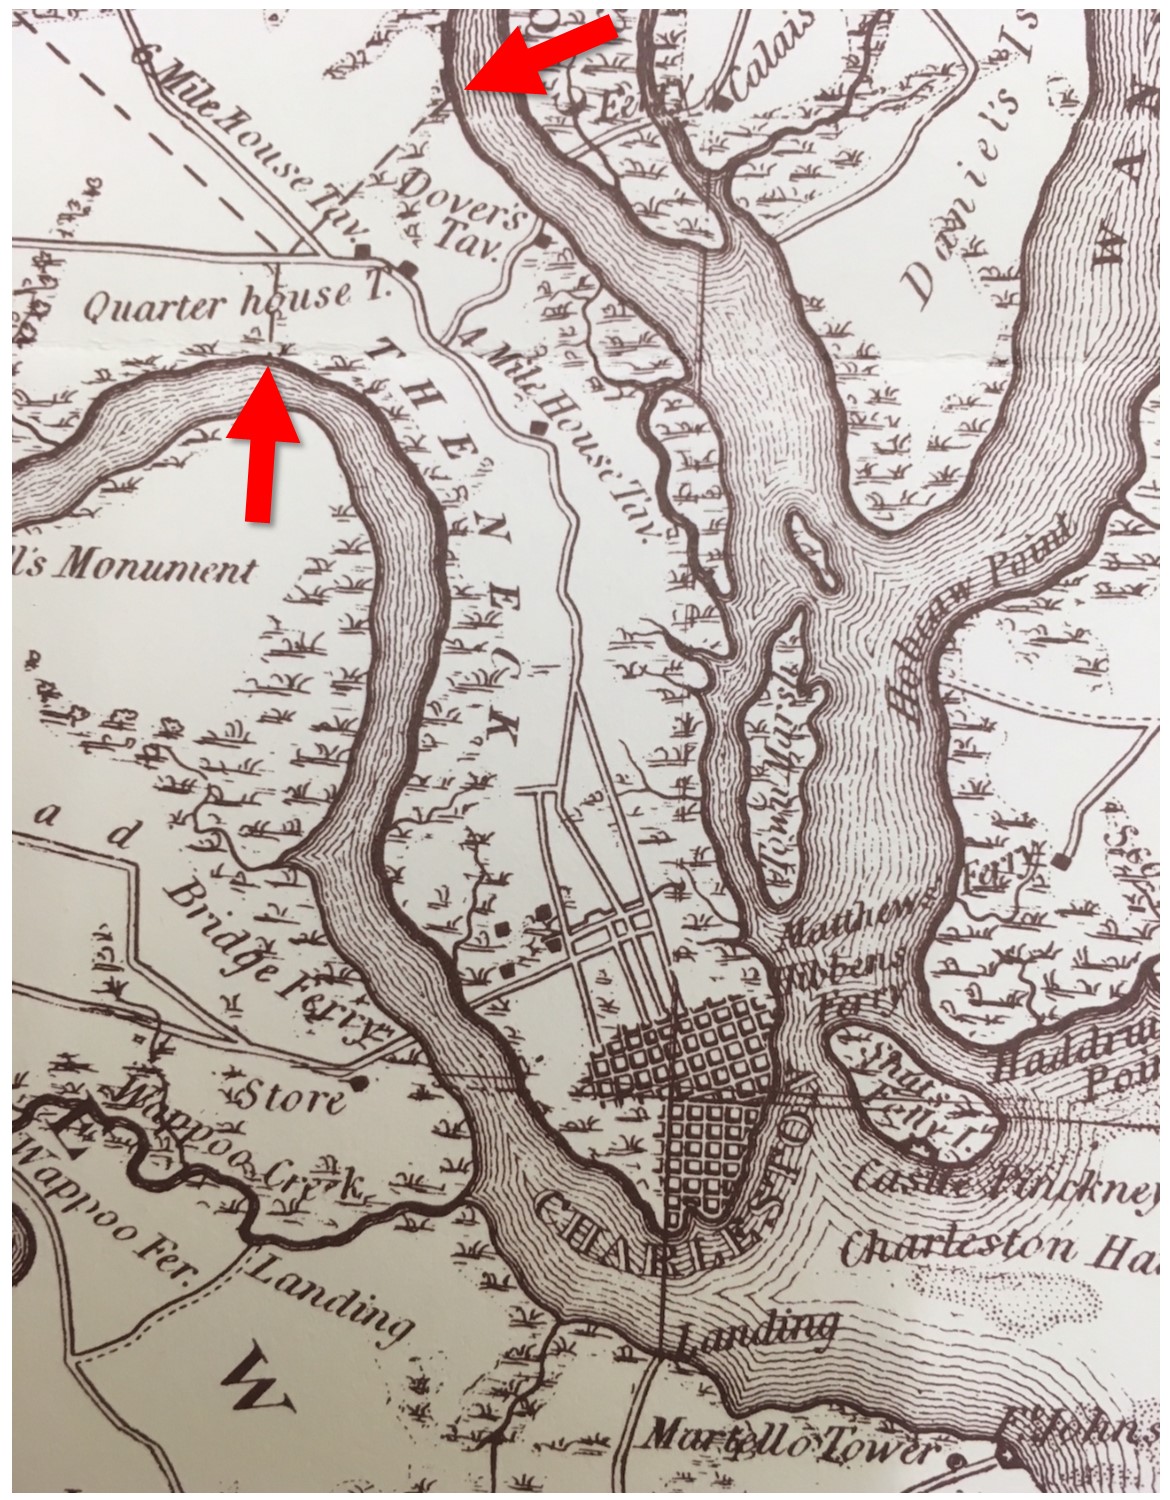 Squeezing Charleston Neck, from 1783 to the Present